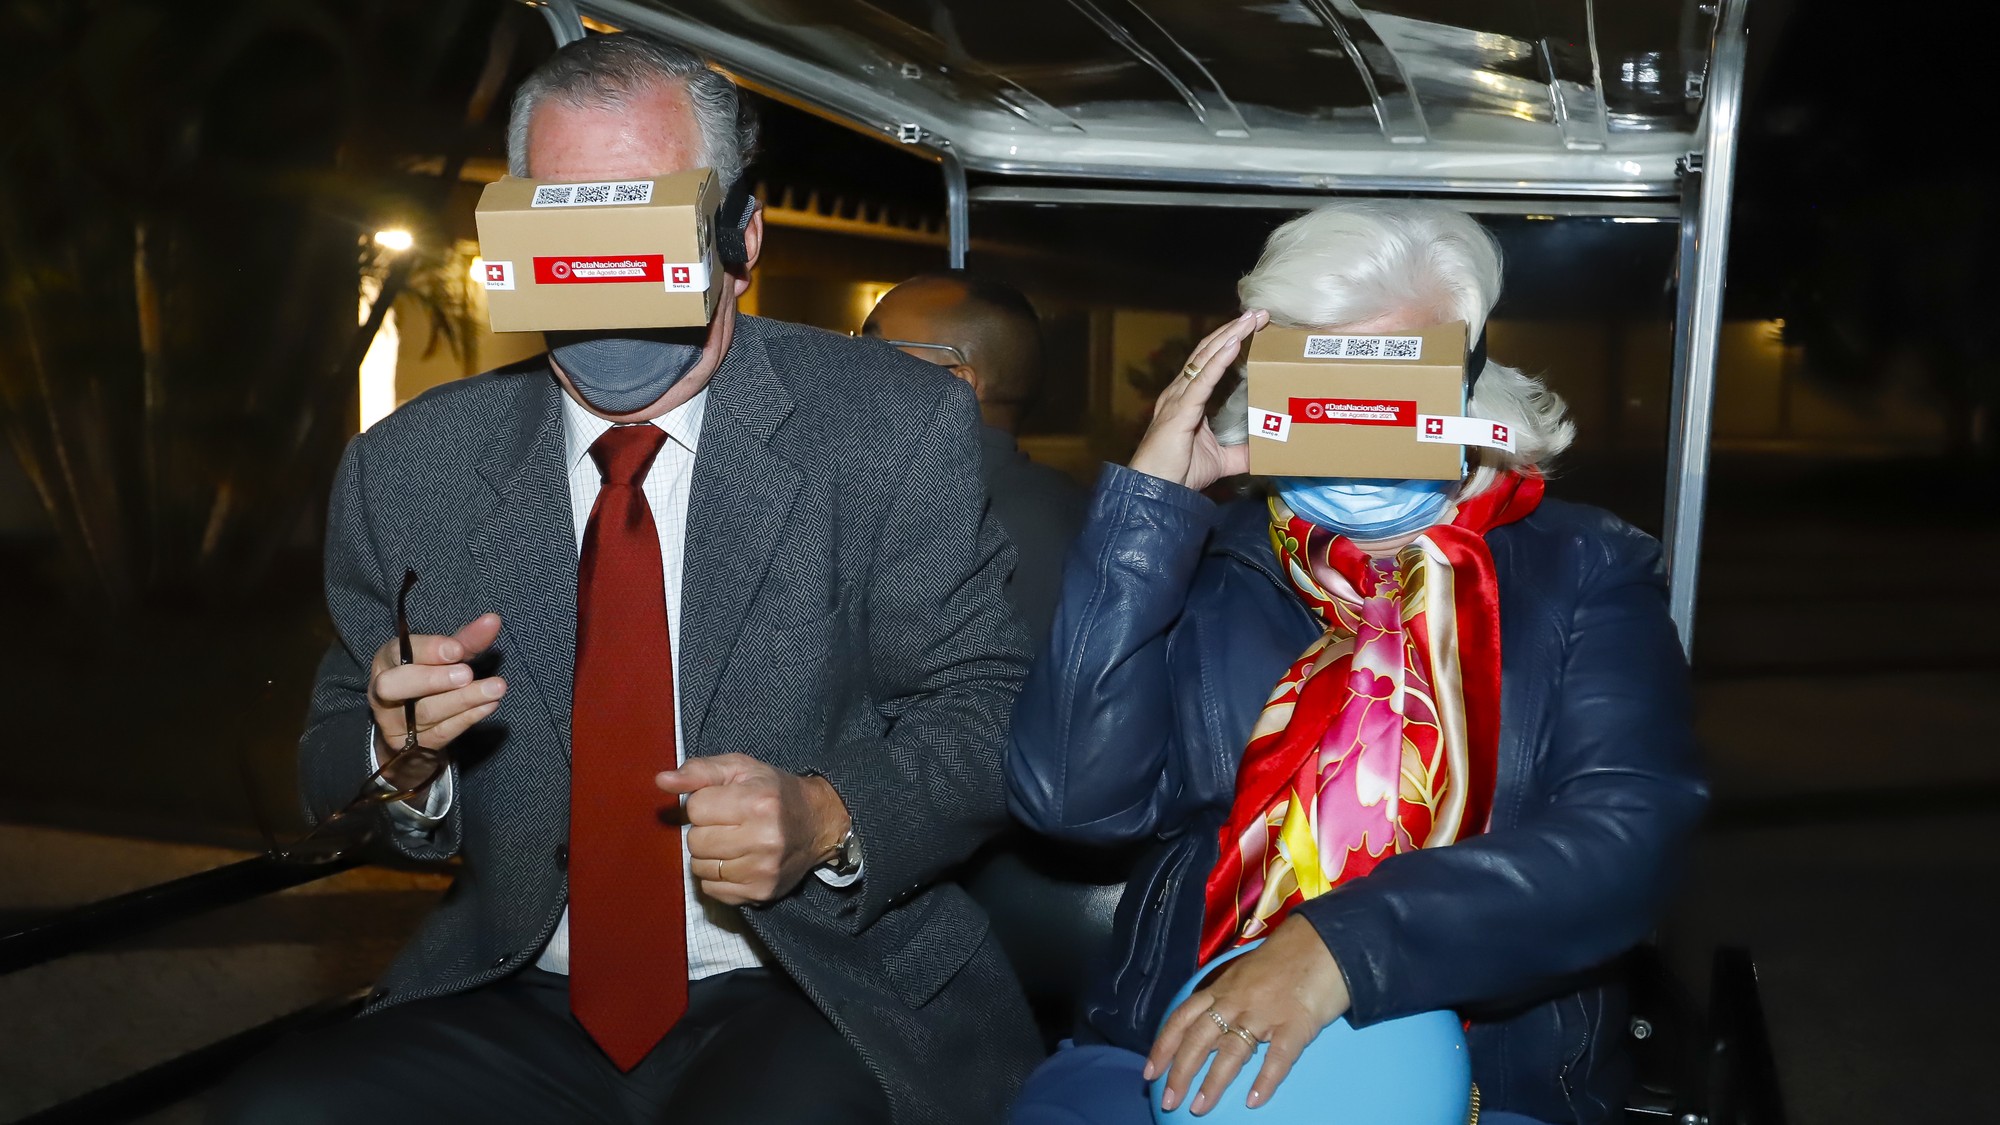 Guests om Ecarts doing the virtual reality experience